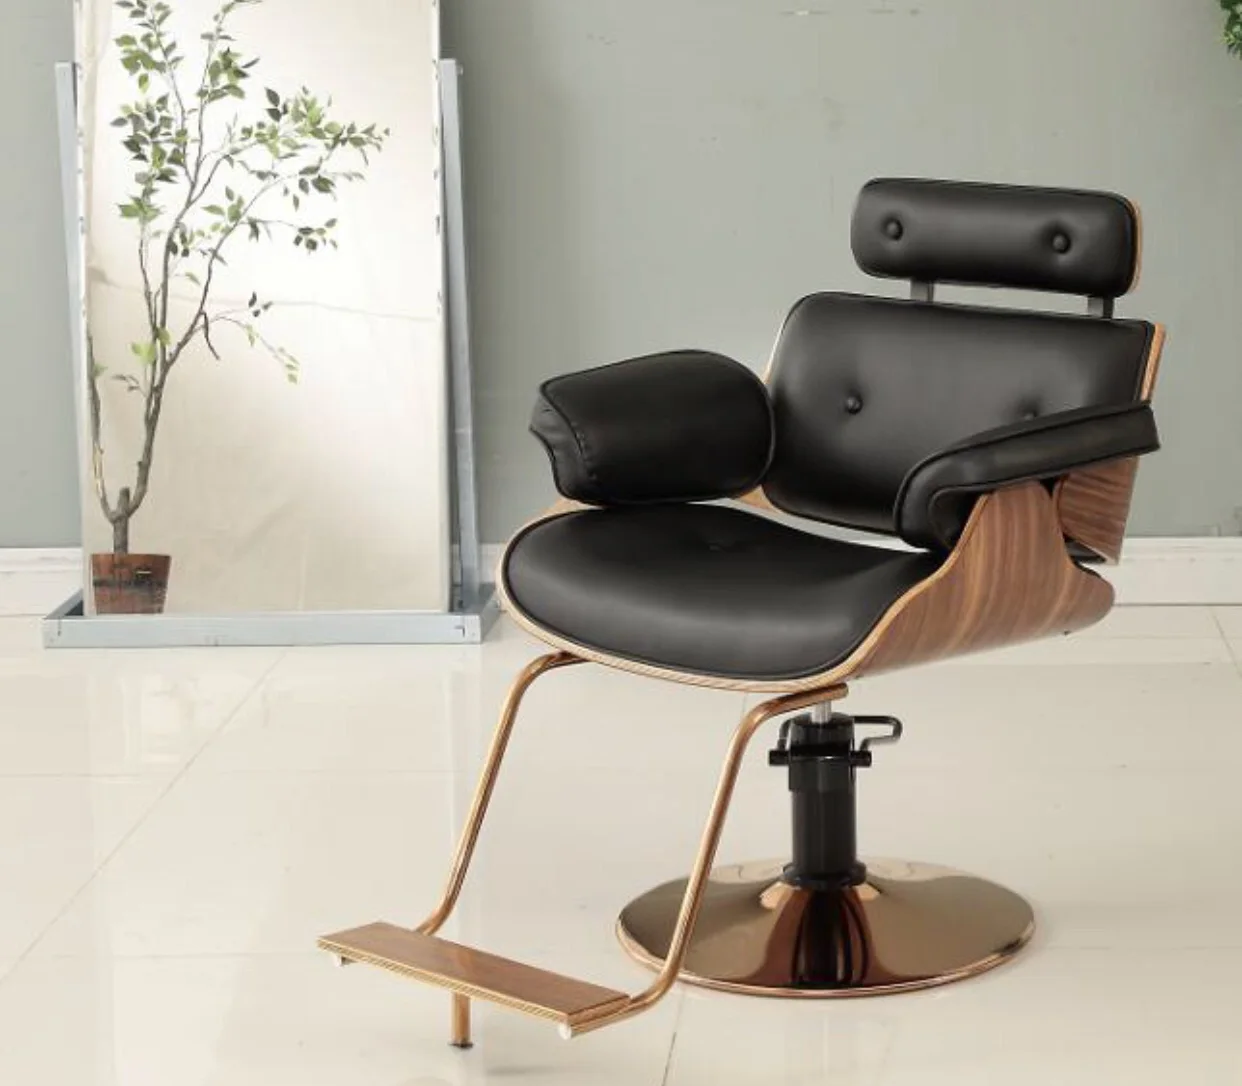 Ergonomic Design Curved Wood Nice Sale Hair Salon Chair Ladies Hair Styling  Make Up Chair - Buy Hair Styling Chair With Footrest,Styling Chair Hair  Salon Furniture,Barber Shop Chairs For Sale Product on